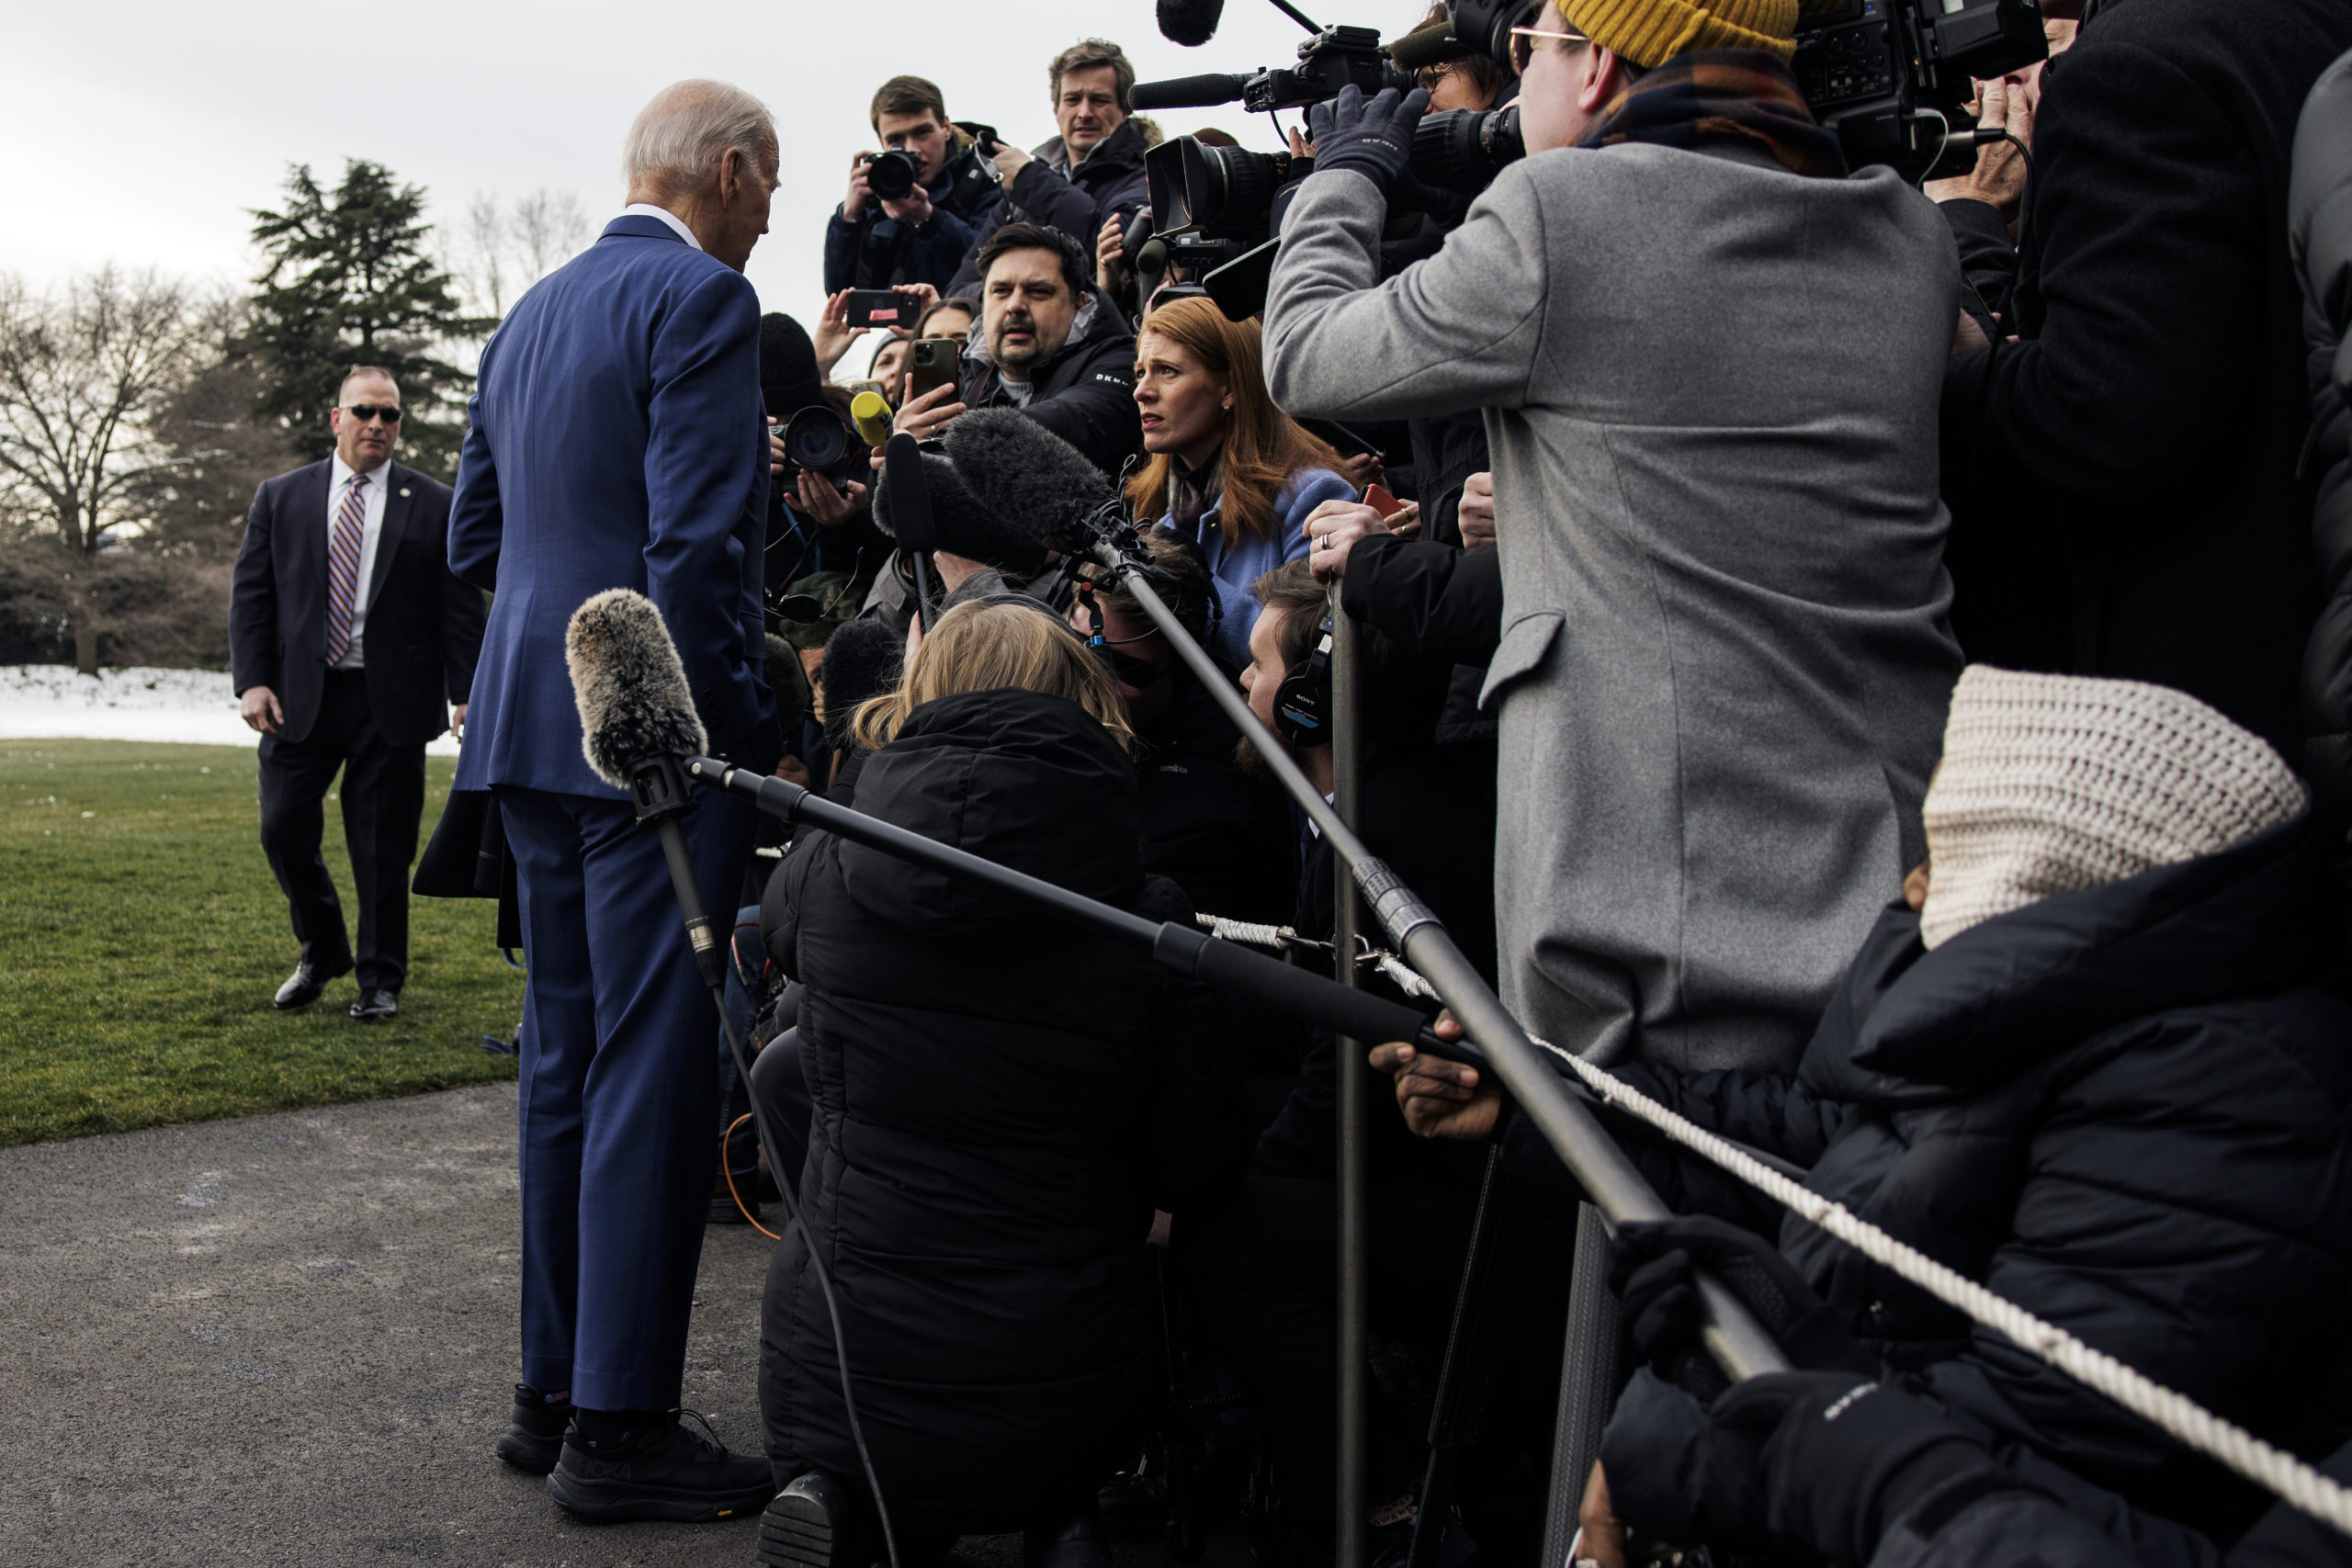 U.S. President Joe Biden takes some questions from members of the press before departing in Marine One from the South Lawn of the White House on January 18, 2024 in Washington, DC. The President is heading to North Carolina where he will deliver a speech on his economic agenda. (Photo by Samuel Corum/Getty Images)